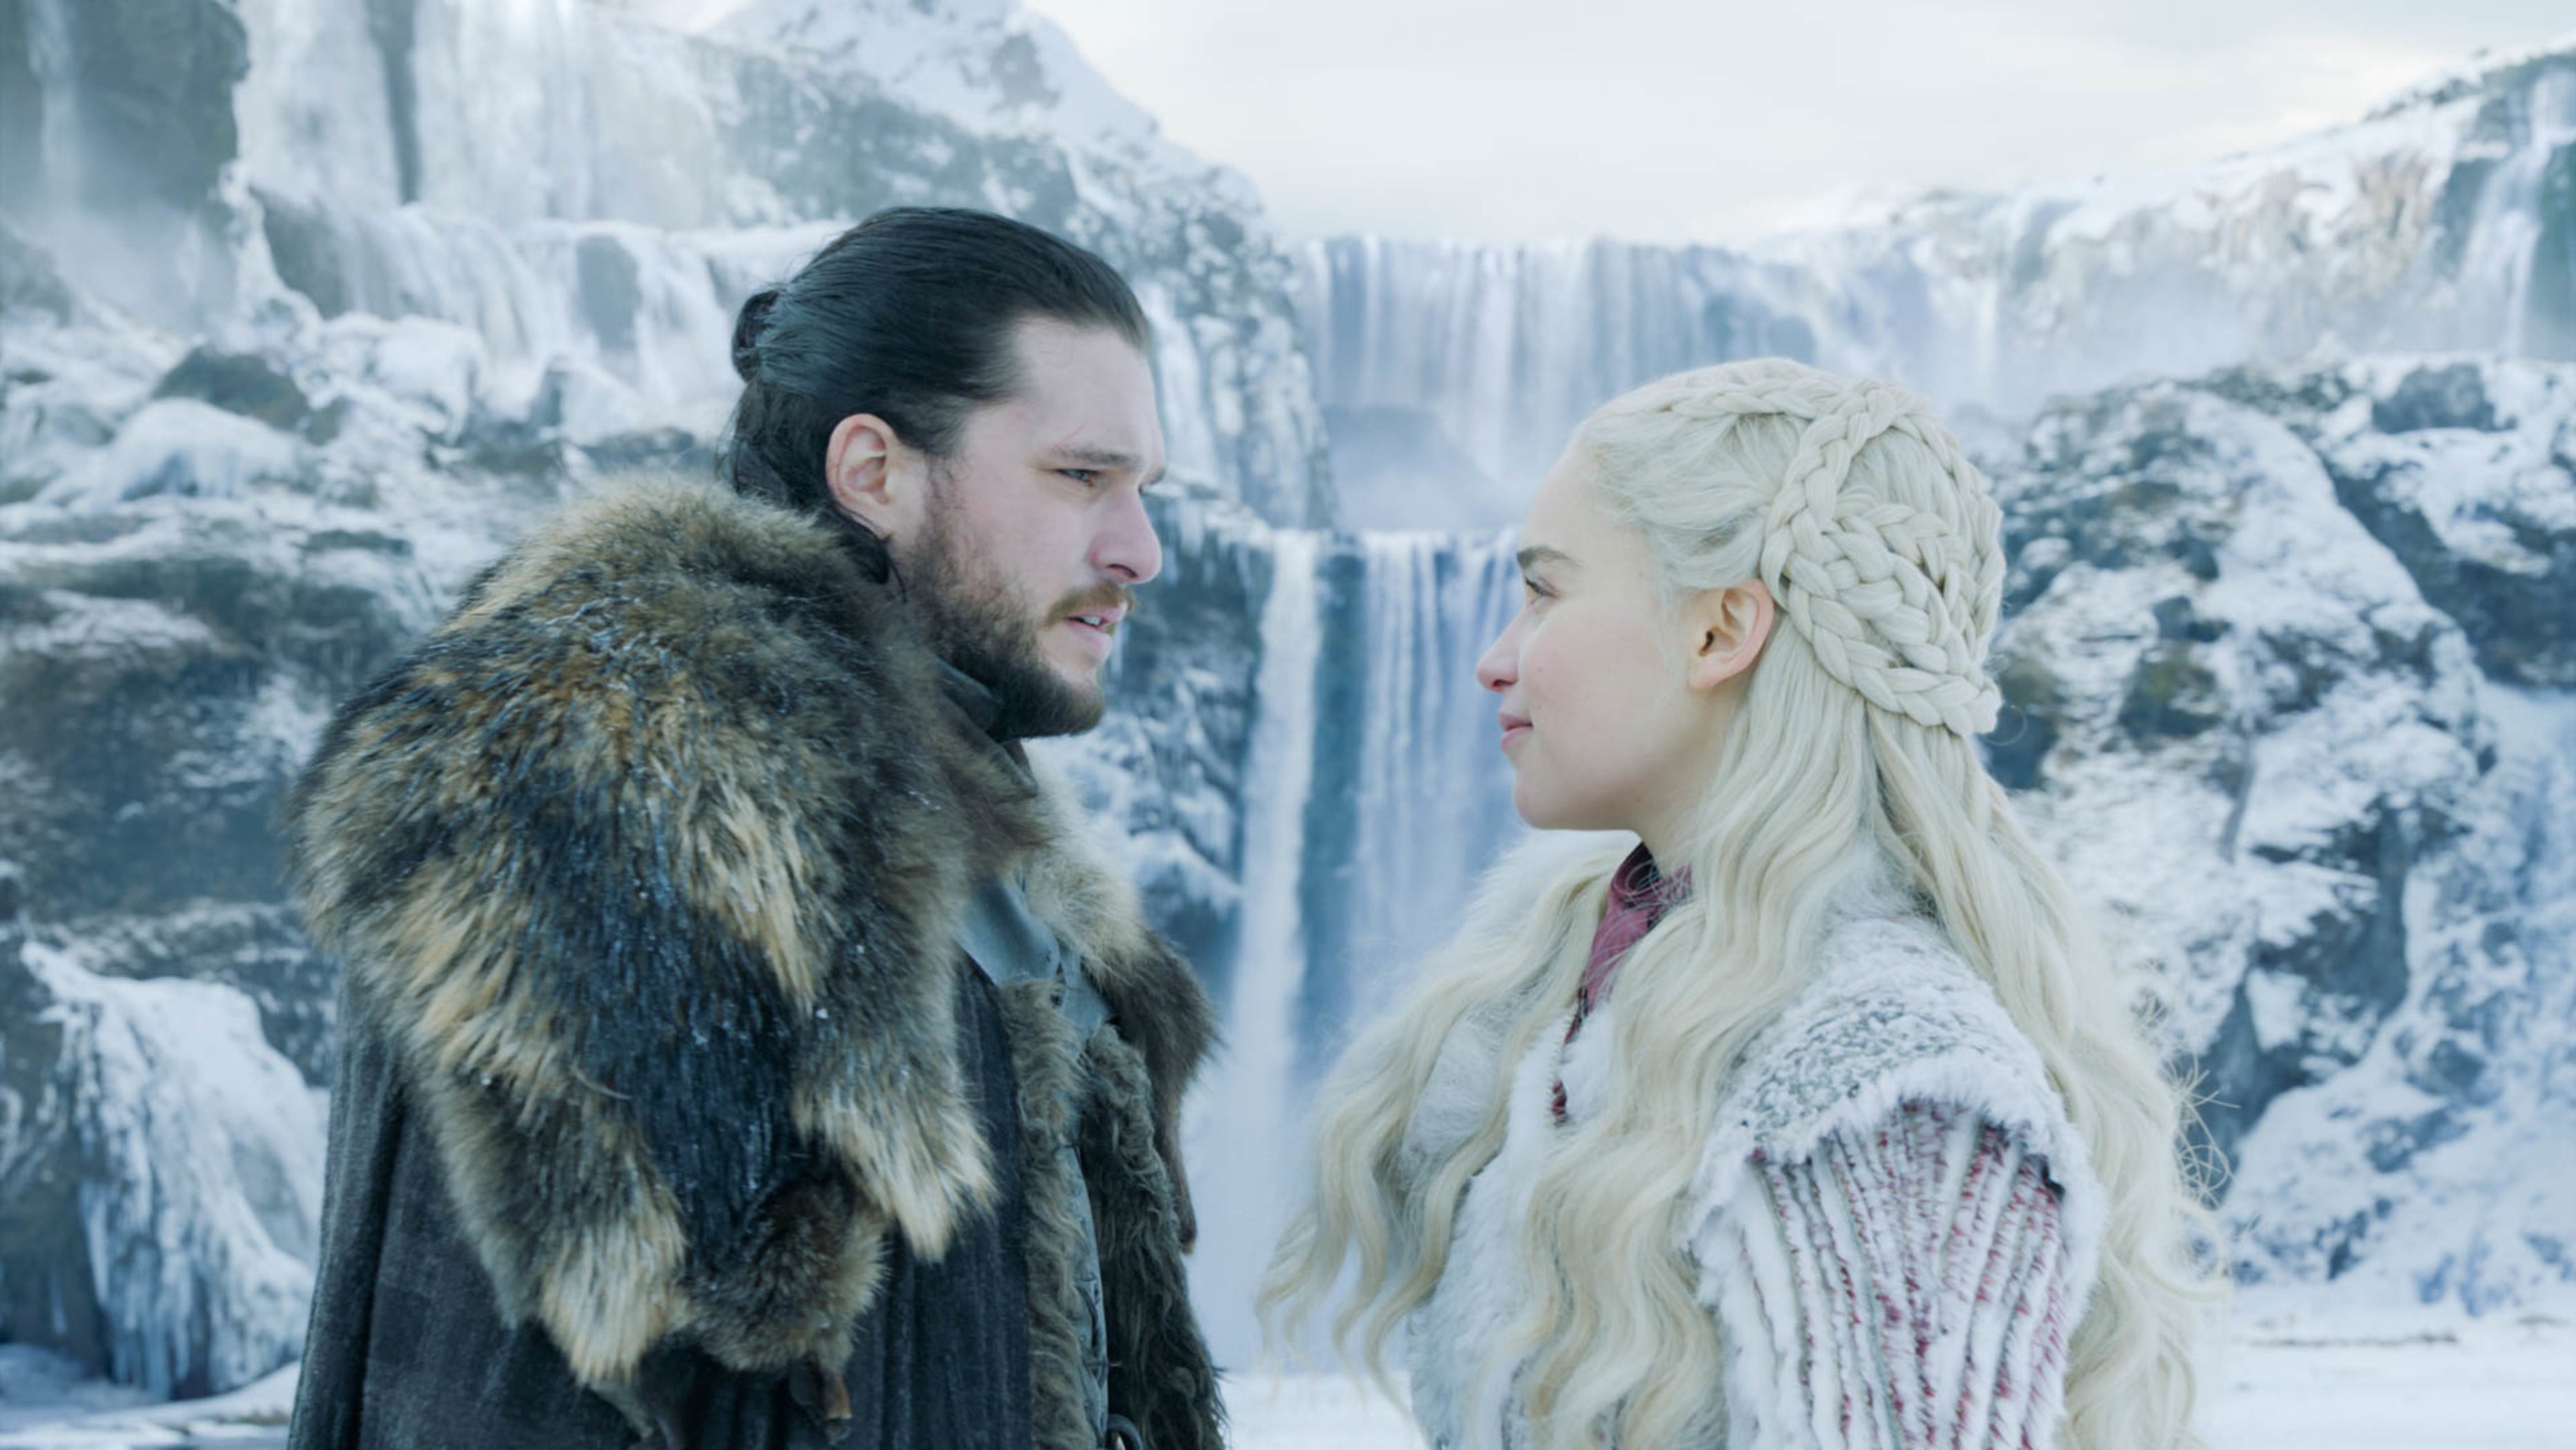 Duolingo’s High Valyrian Lessons Will Help You Speak Like A ‘Game Of Thrones’ Character